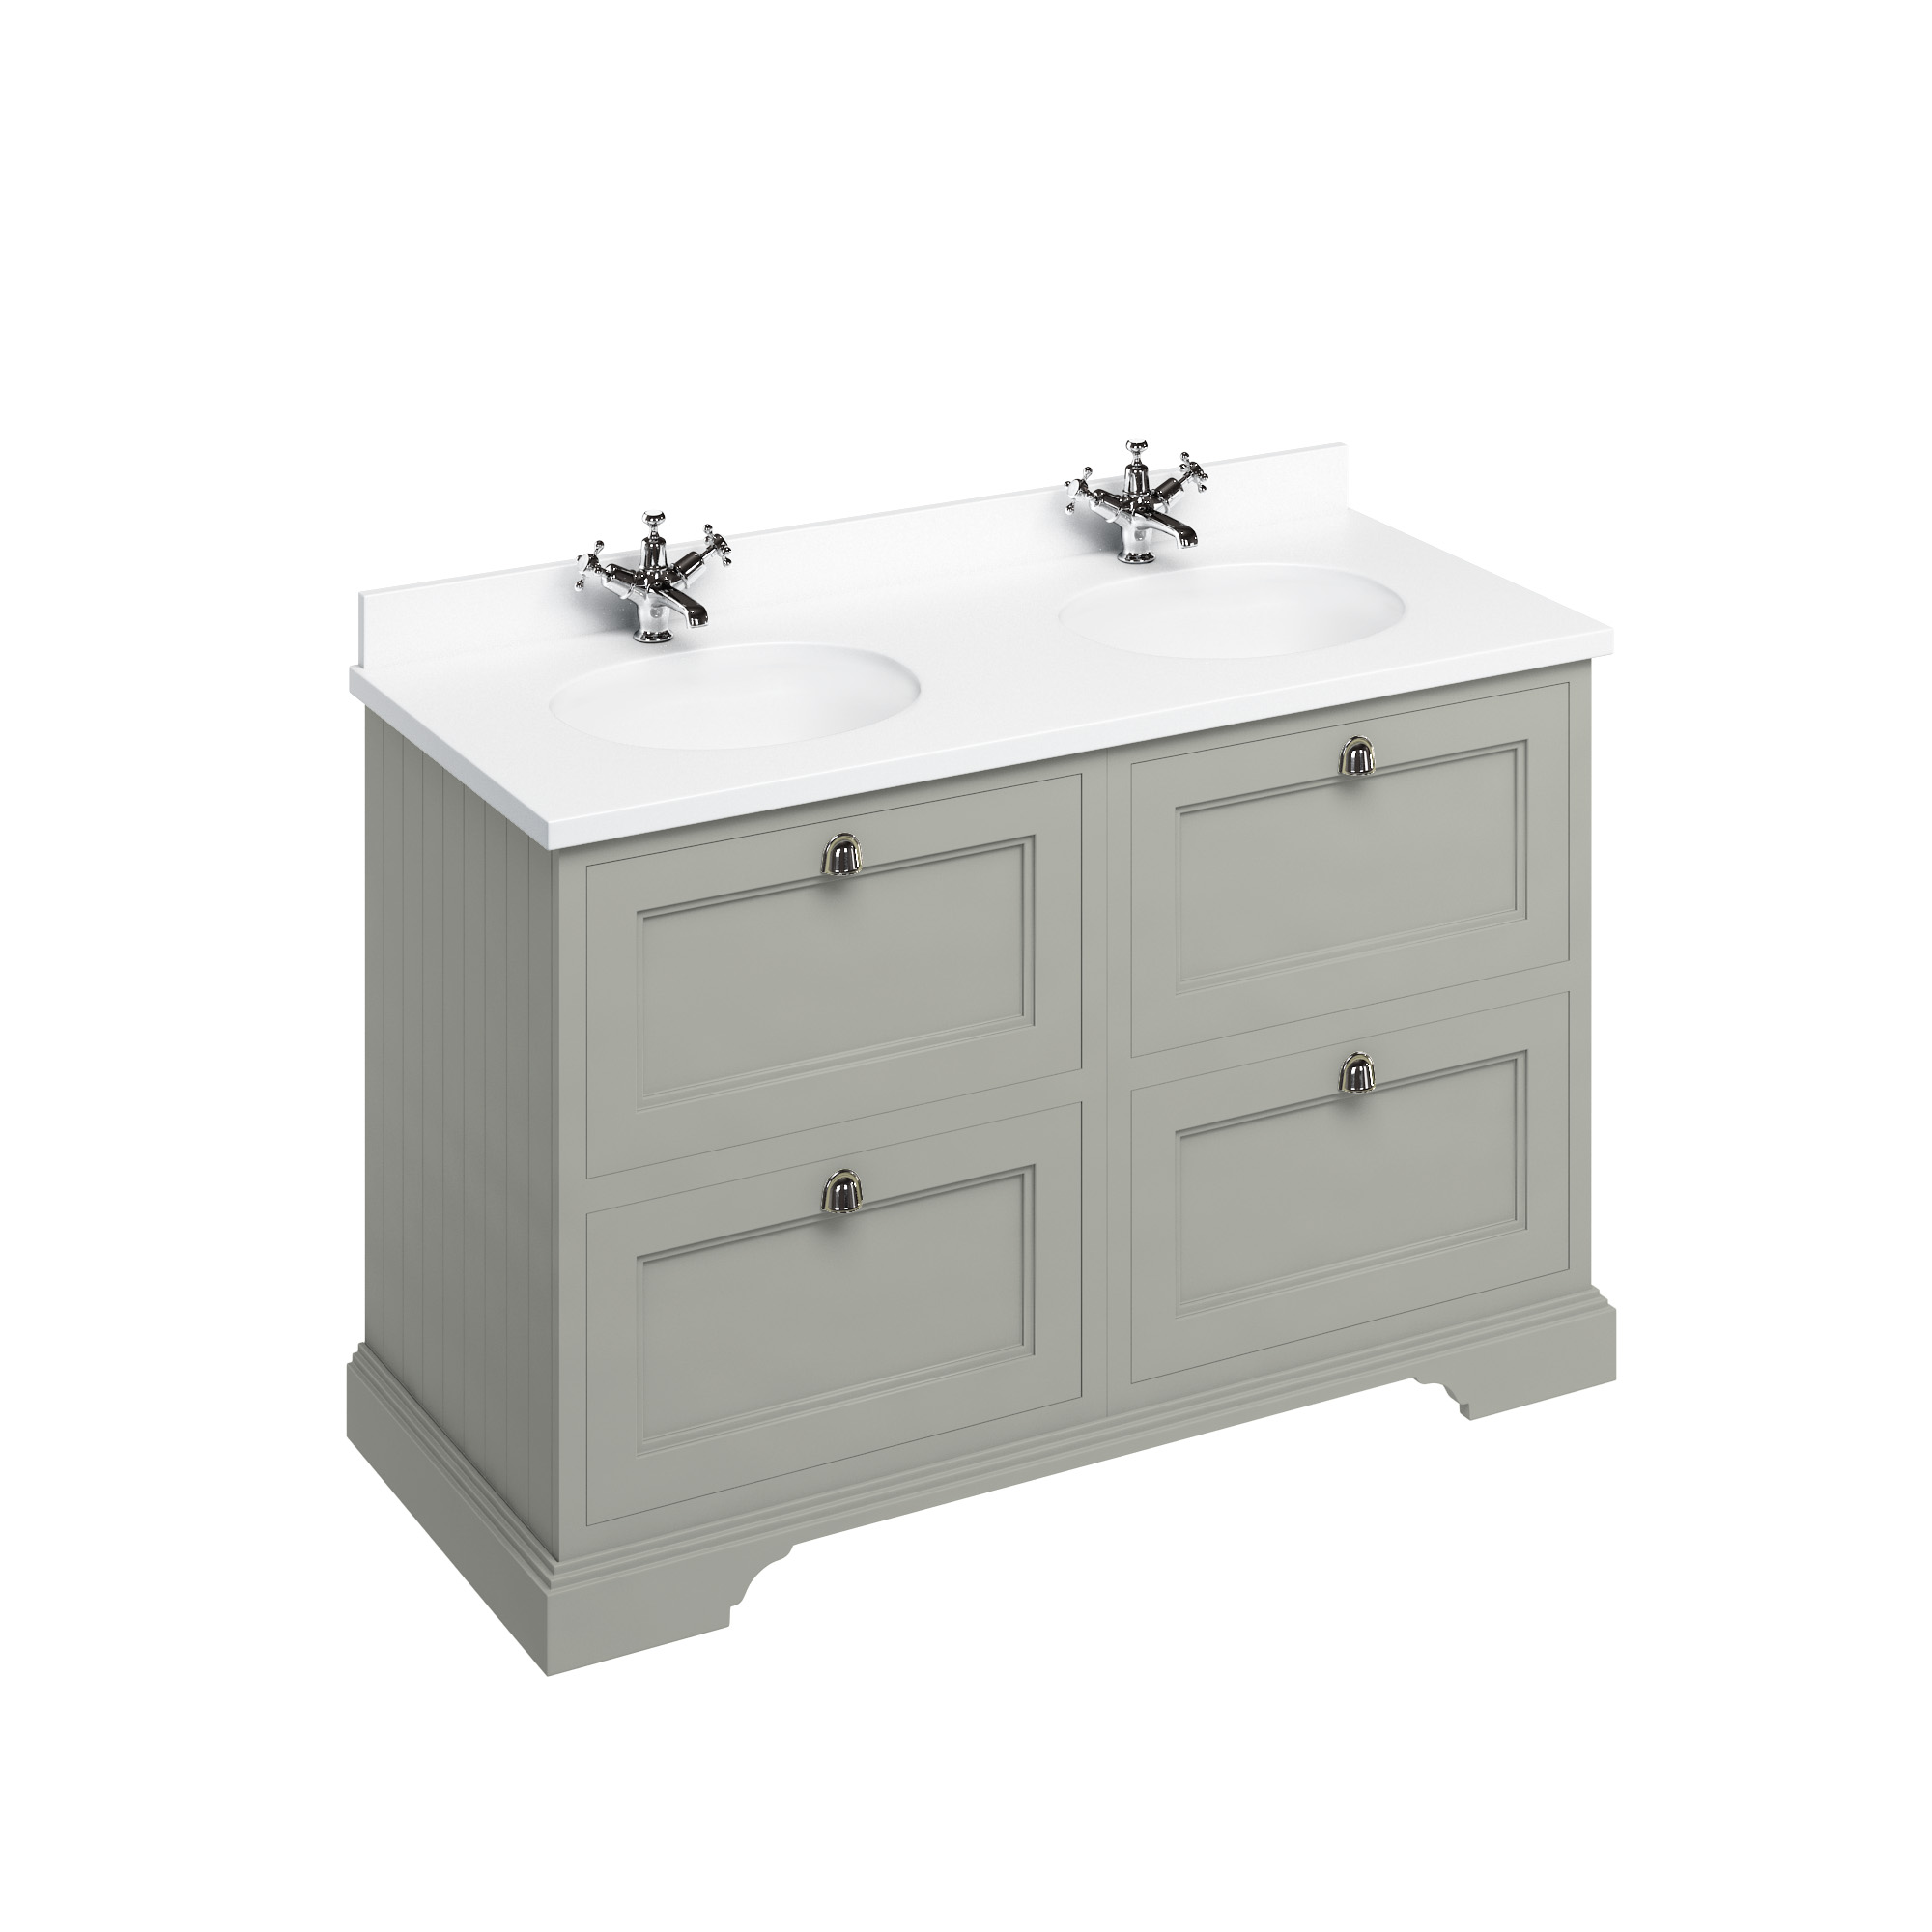 Freestanding 130 Vanity Unit with drawers - Dark Olive and Minerva white worktop with two integrated white basins